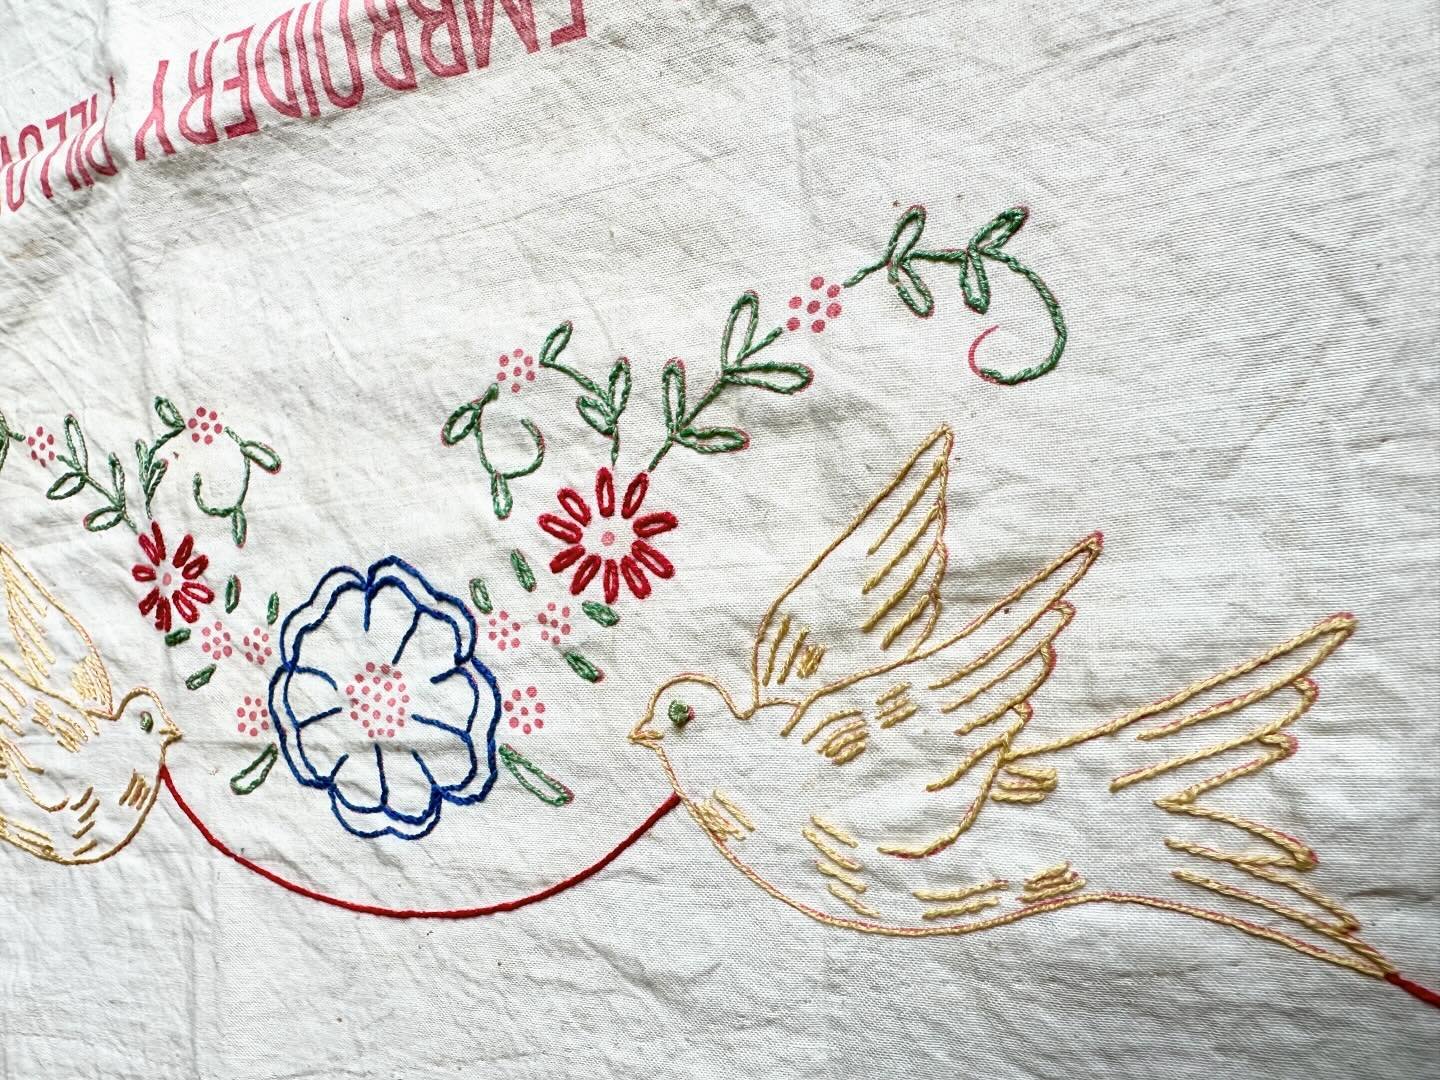 #feedsackfriday Kind of challenging to capture this beautifully embroidered sack&mdash;it doesn't fit well into the IG format. Sent to me by my sweet friend @omieasmus - I've never seen a Bemis sack quite like this before. Whomever embroidered it had